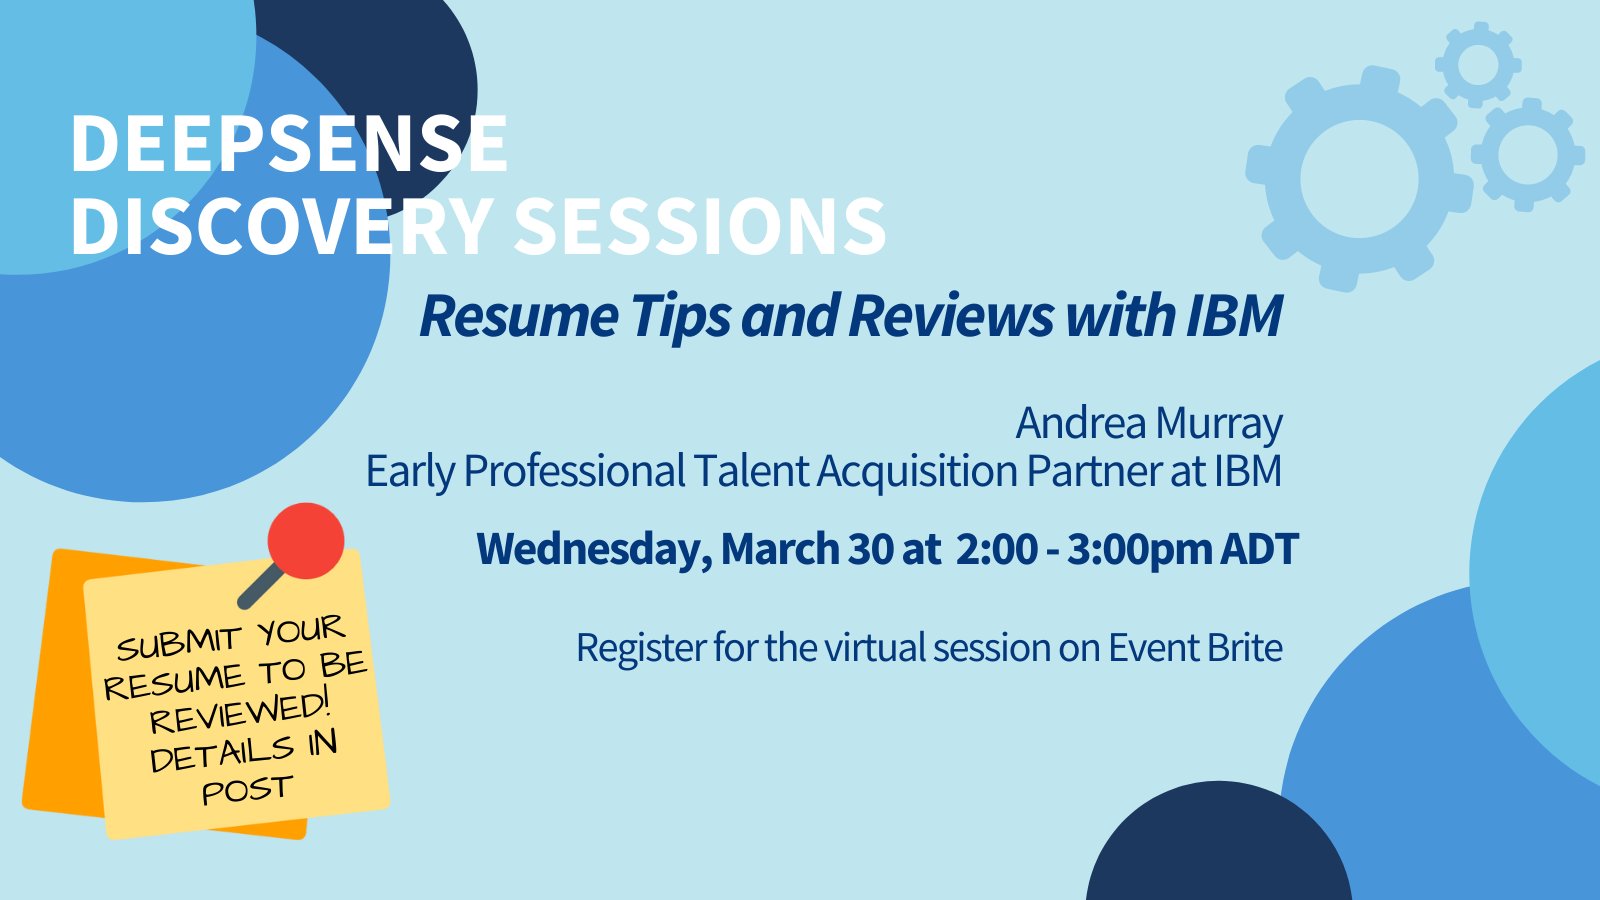 Resume Tips and Reviews with IBM